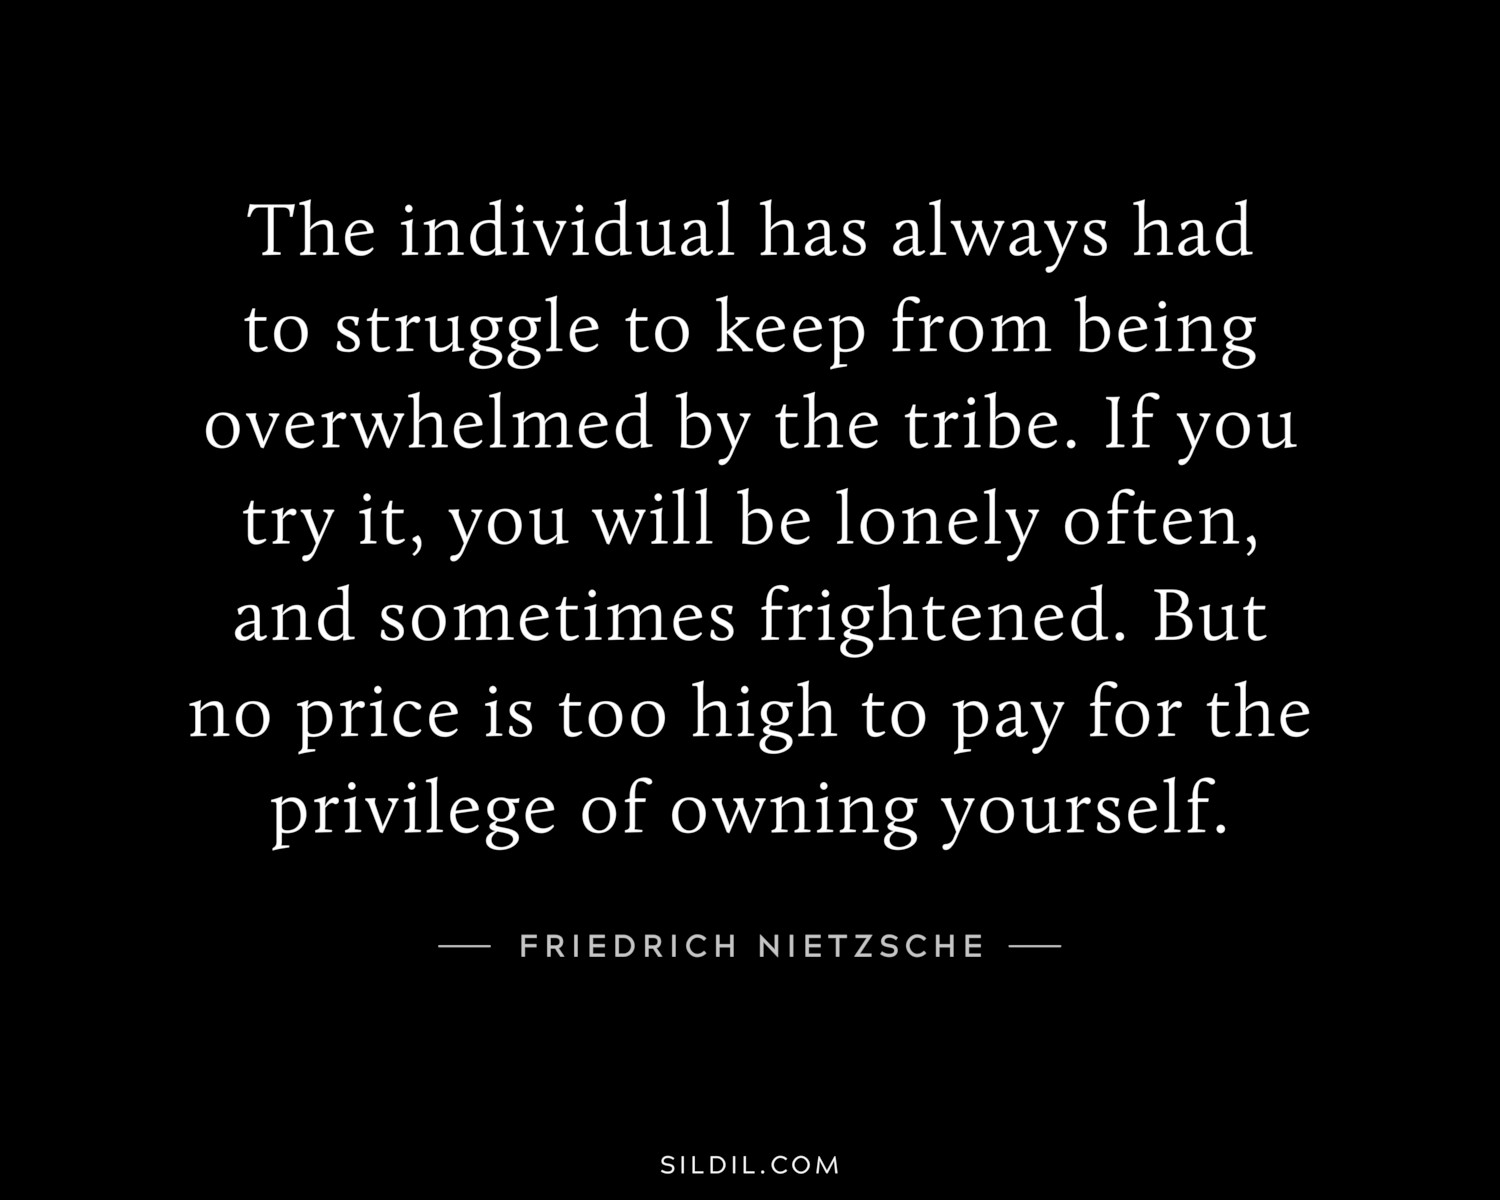 The individual has always had to struggle to keep from being overwhelmed by the tribe. If you try it, you will be lonely often, and sometimes frightened. But no price is too high to pay for the privilege of owning yourself.